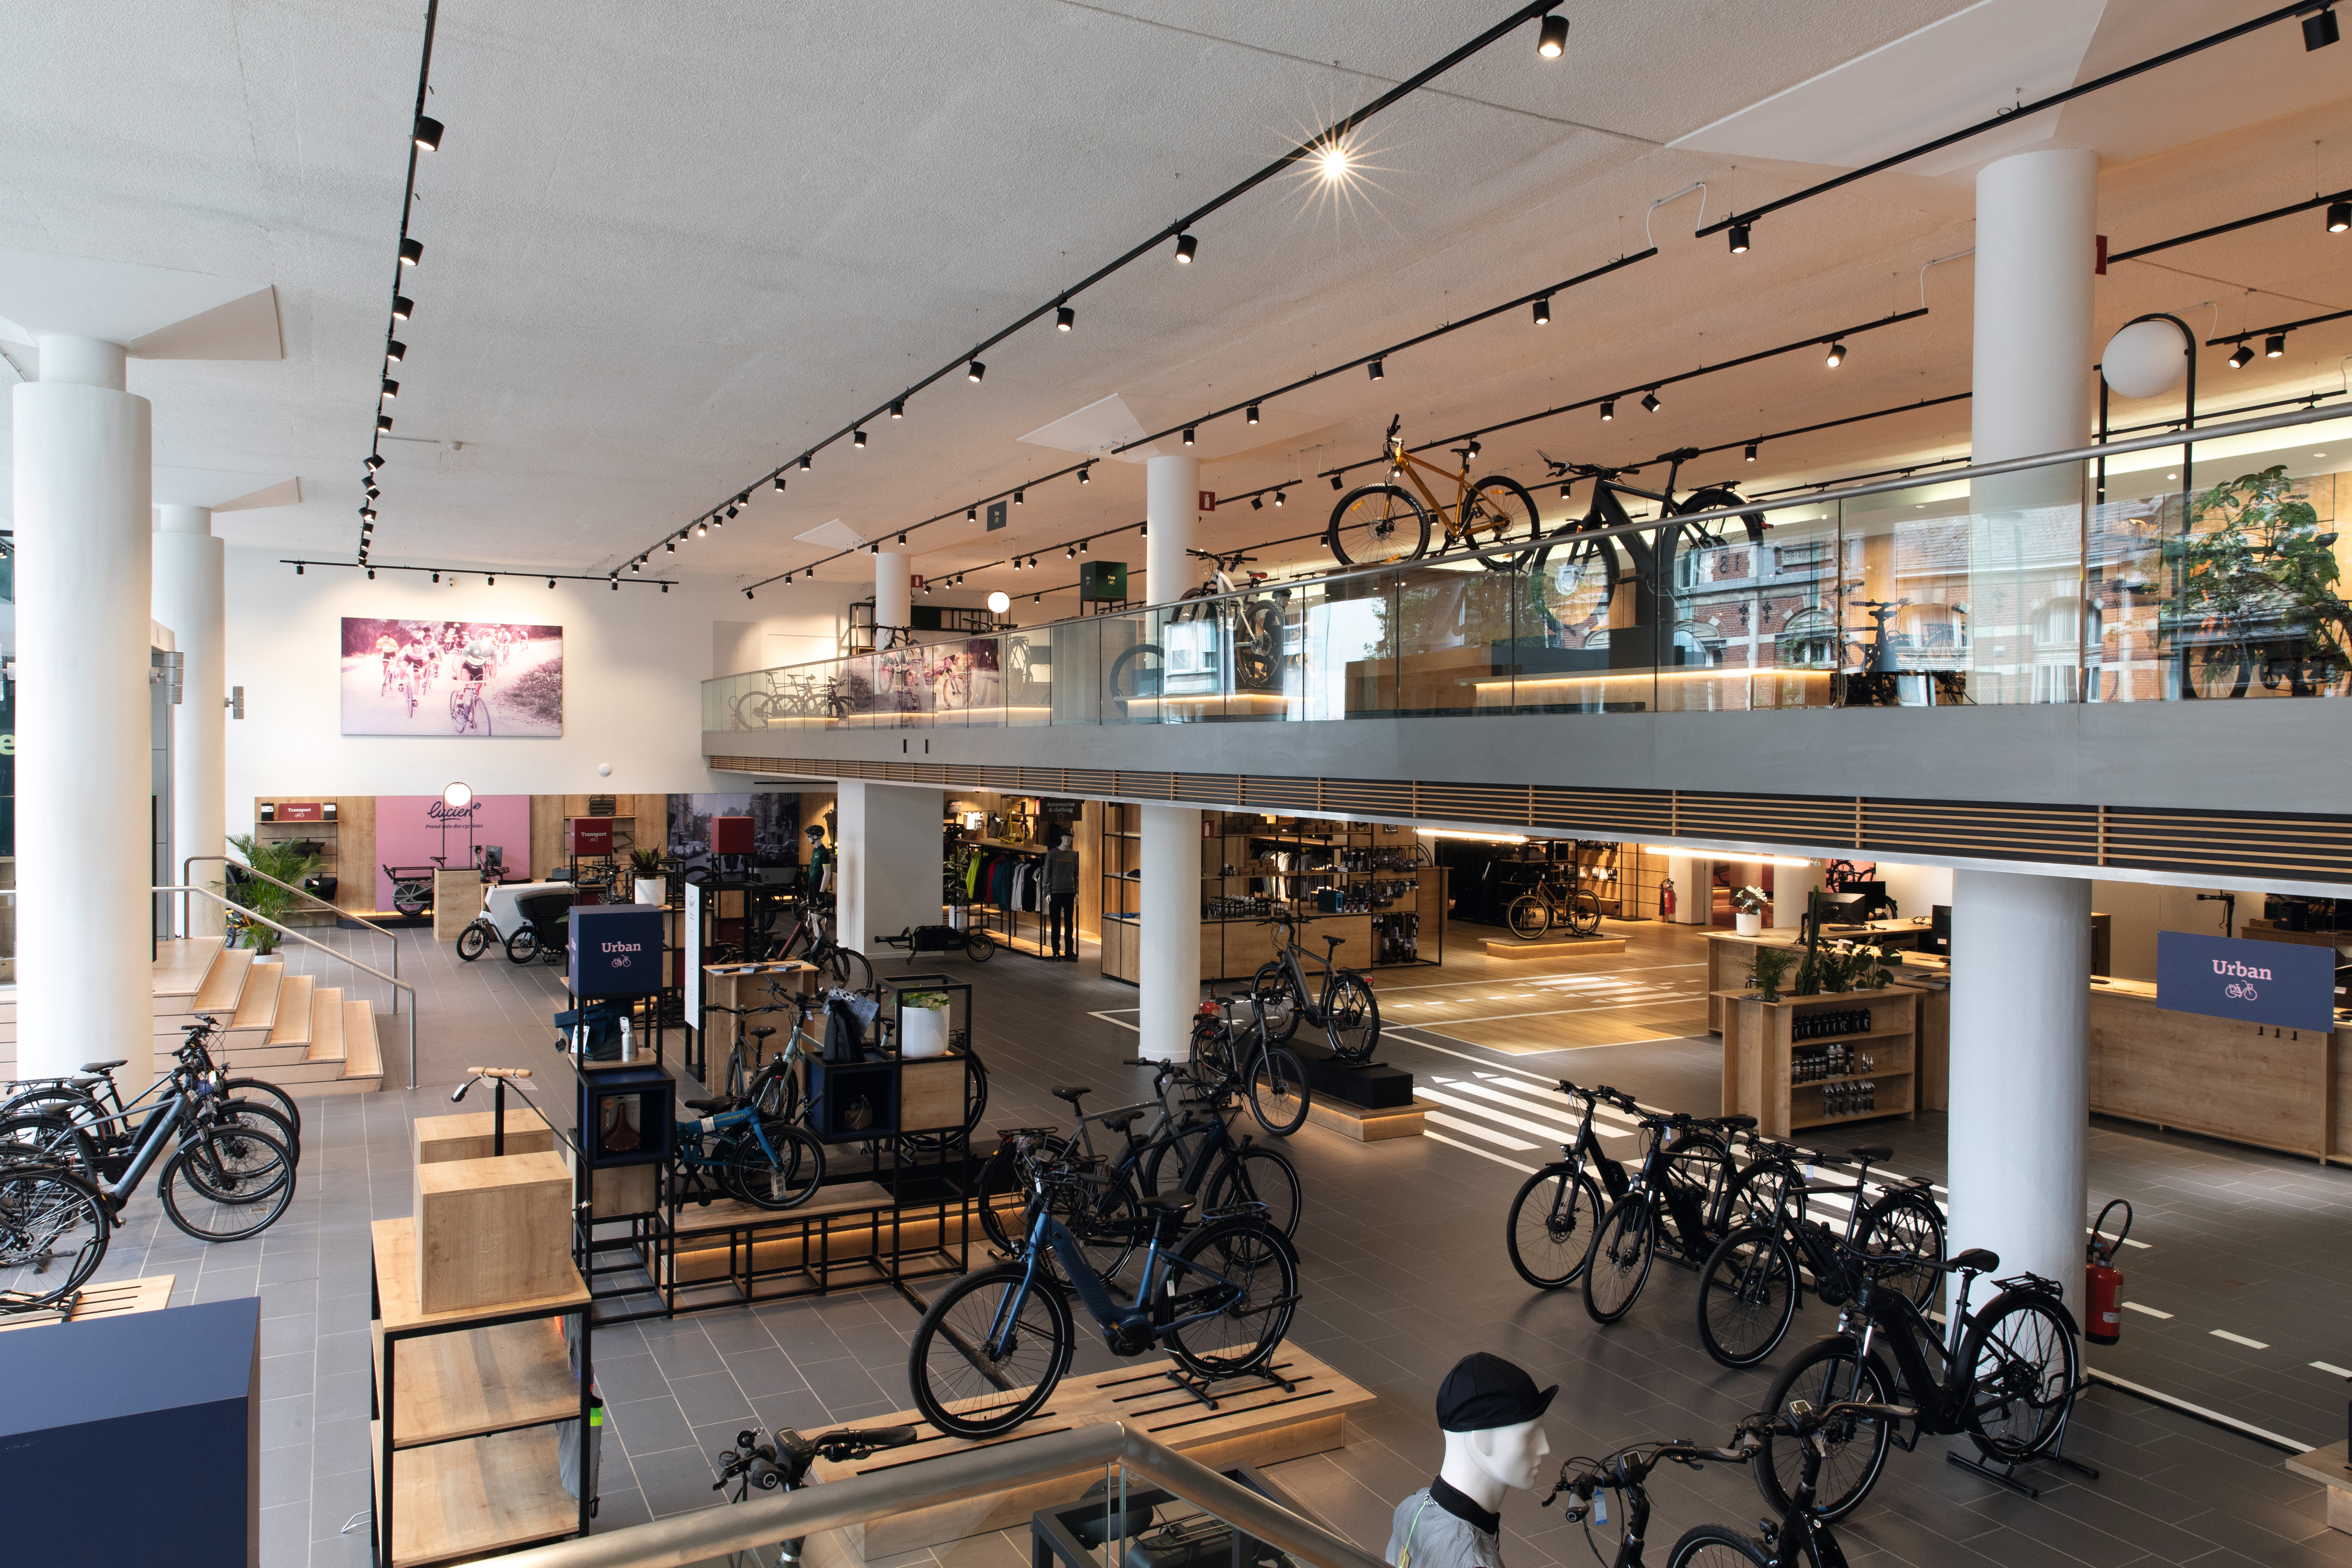 The shop is spread over two floors and offers a wide range of bicycles.